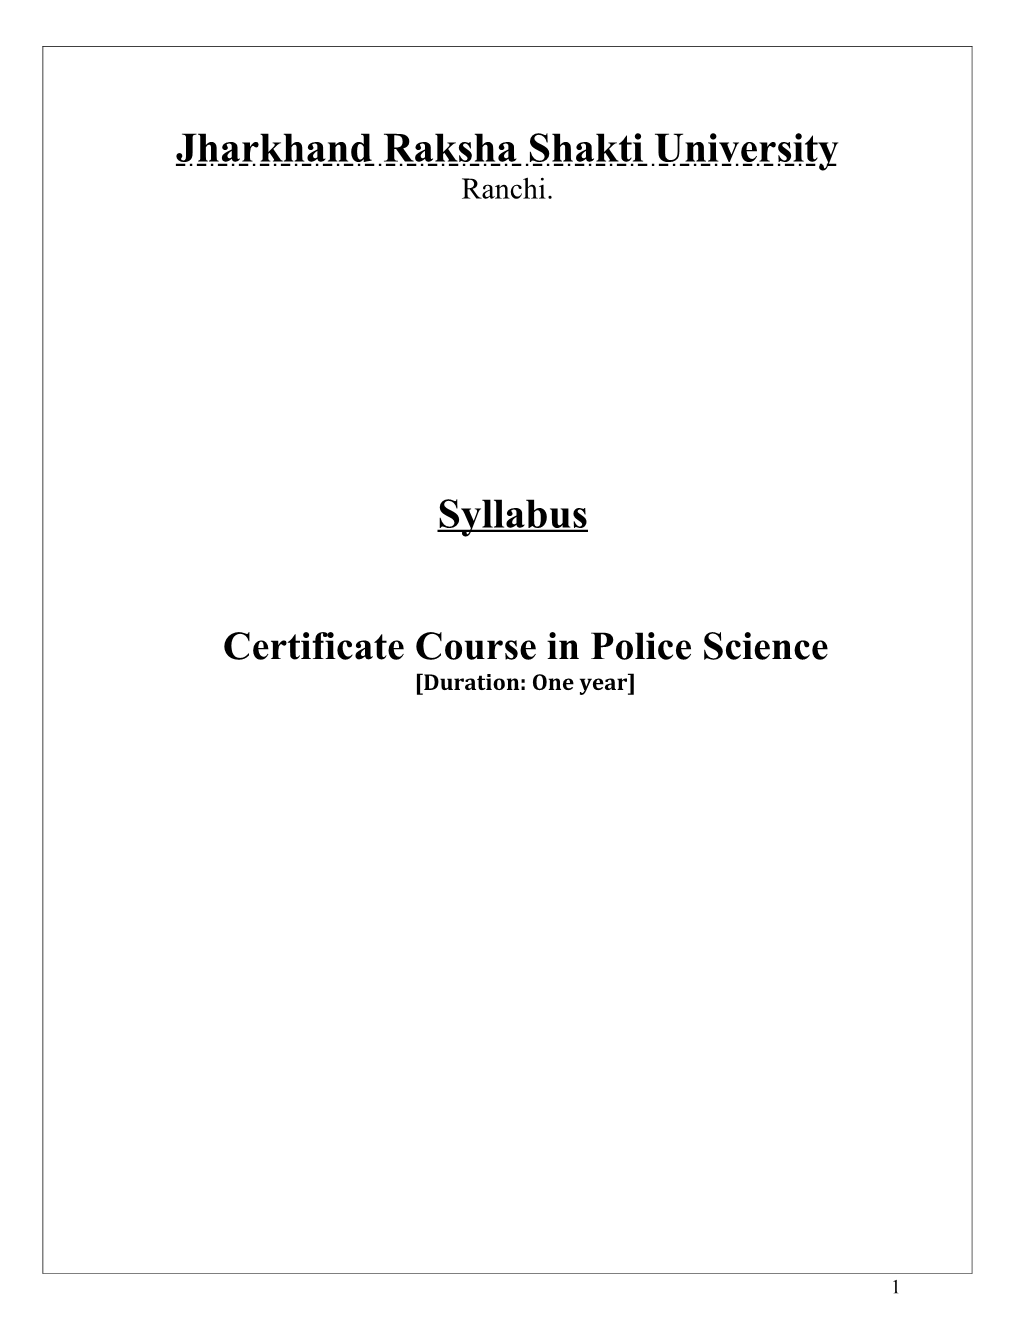 Certificate Course in Police Science